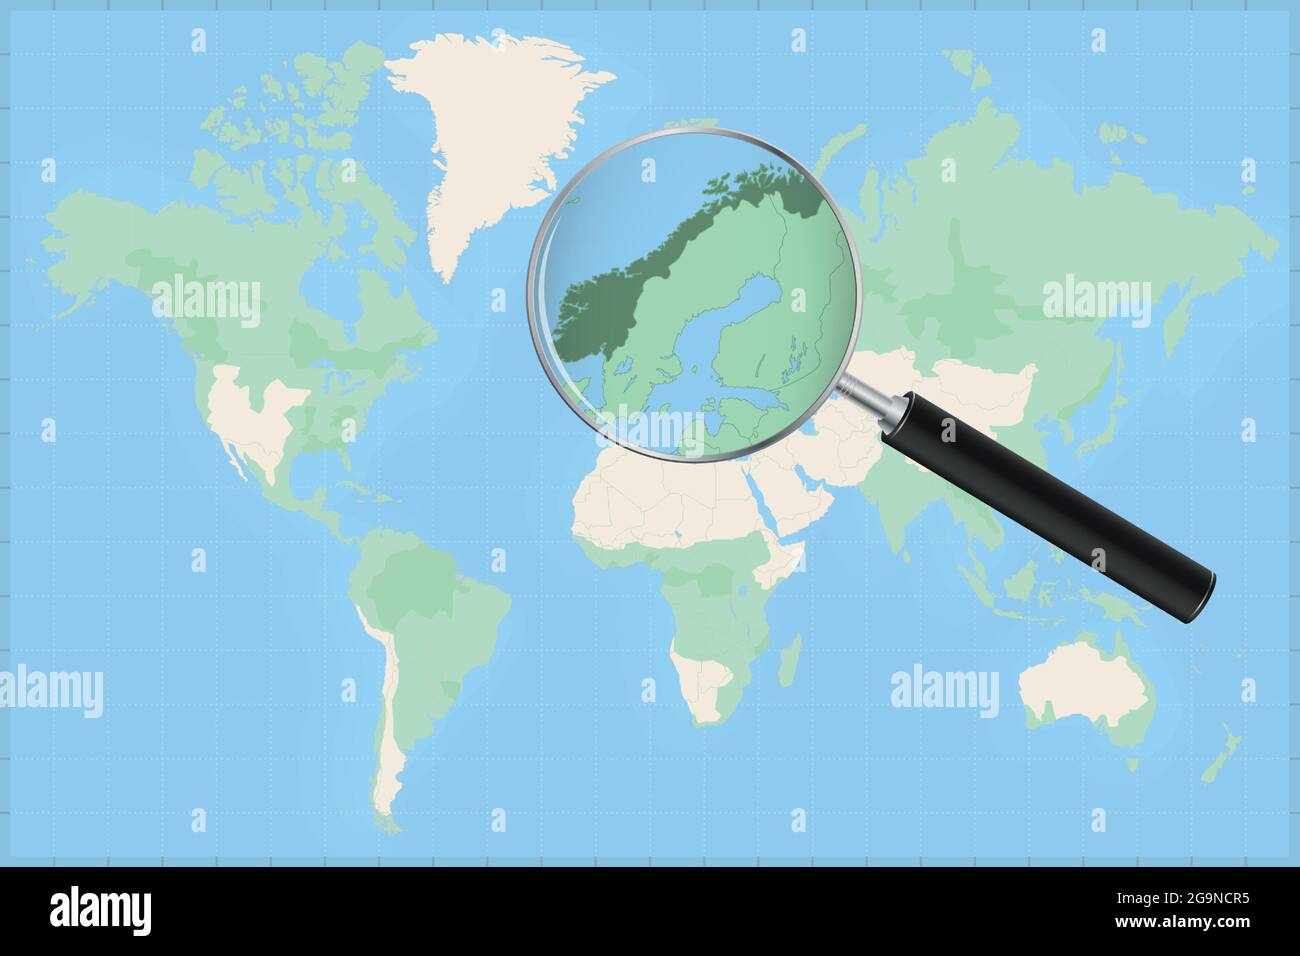 Map Of The World With A Magnifying Glass On A Map Of Norway Detailed Map Of Norway And Neighboring Countries In The Magnifying Glass Stock Vector Image Art Alamy